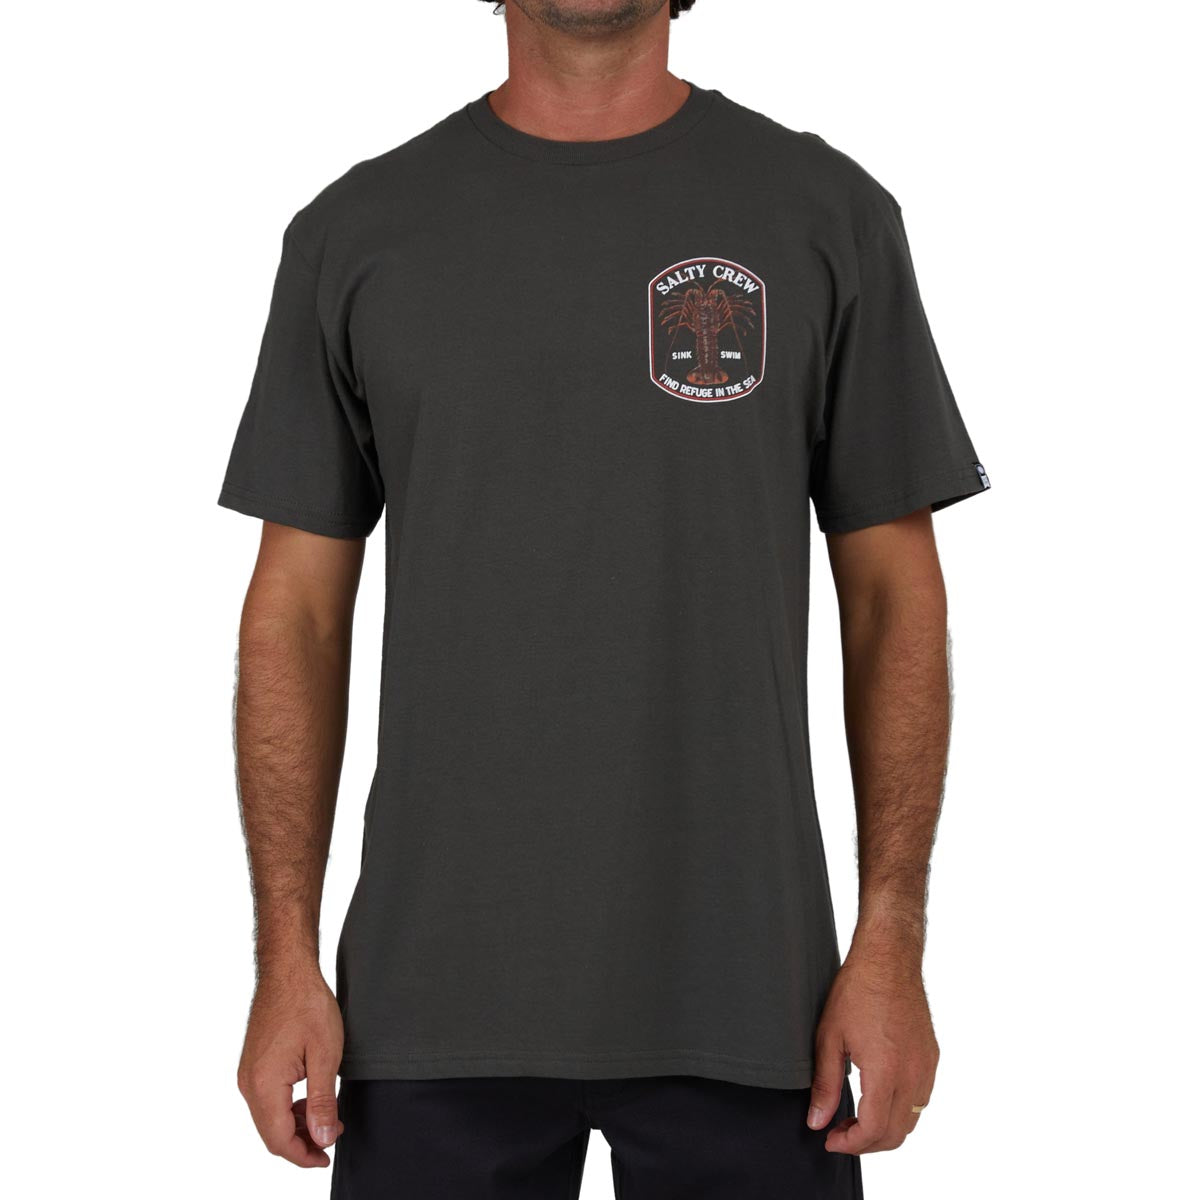 Salty Crew Spiny Classic T-Shirt - Charcoal image 3